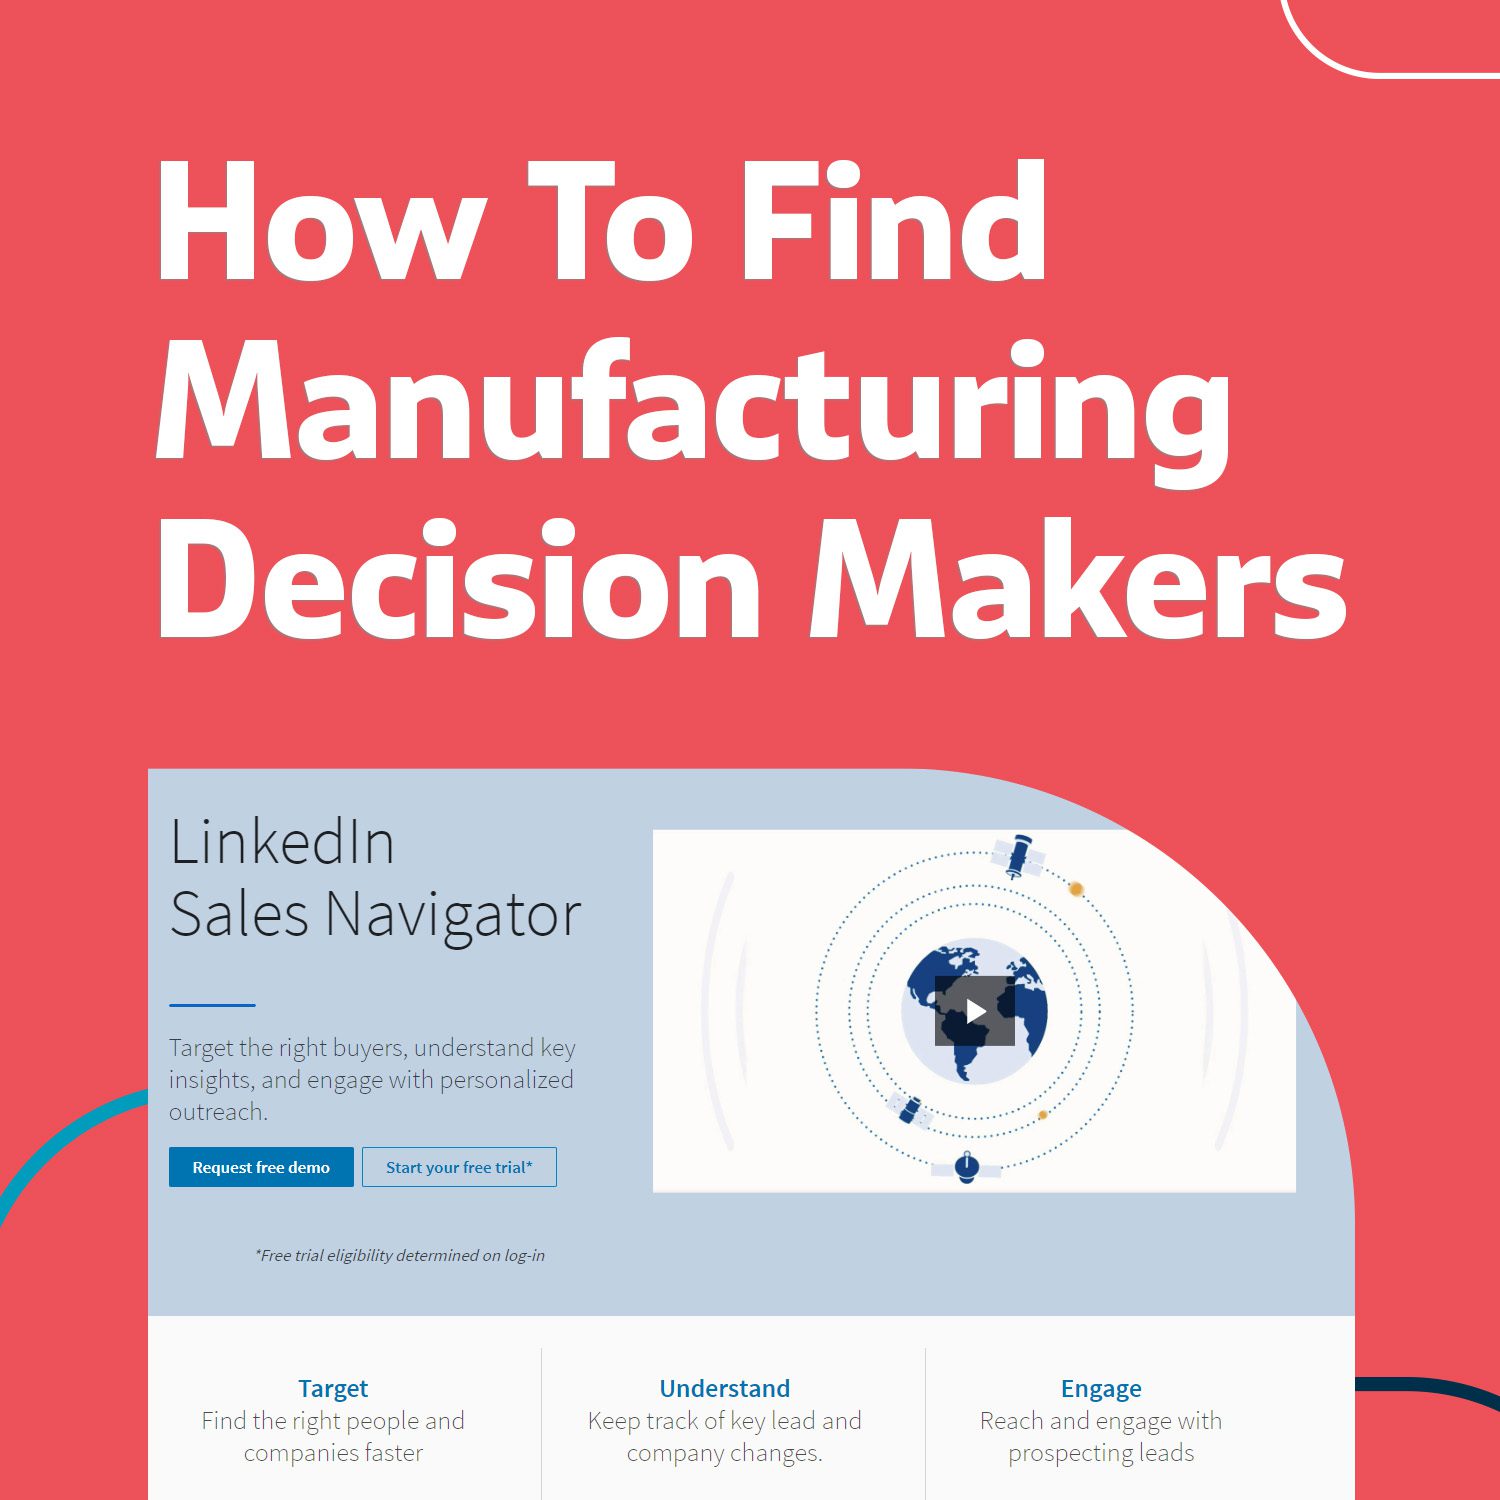 How to find manufacturing decision makers